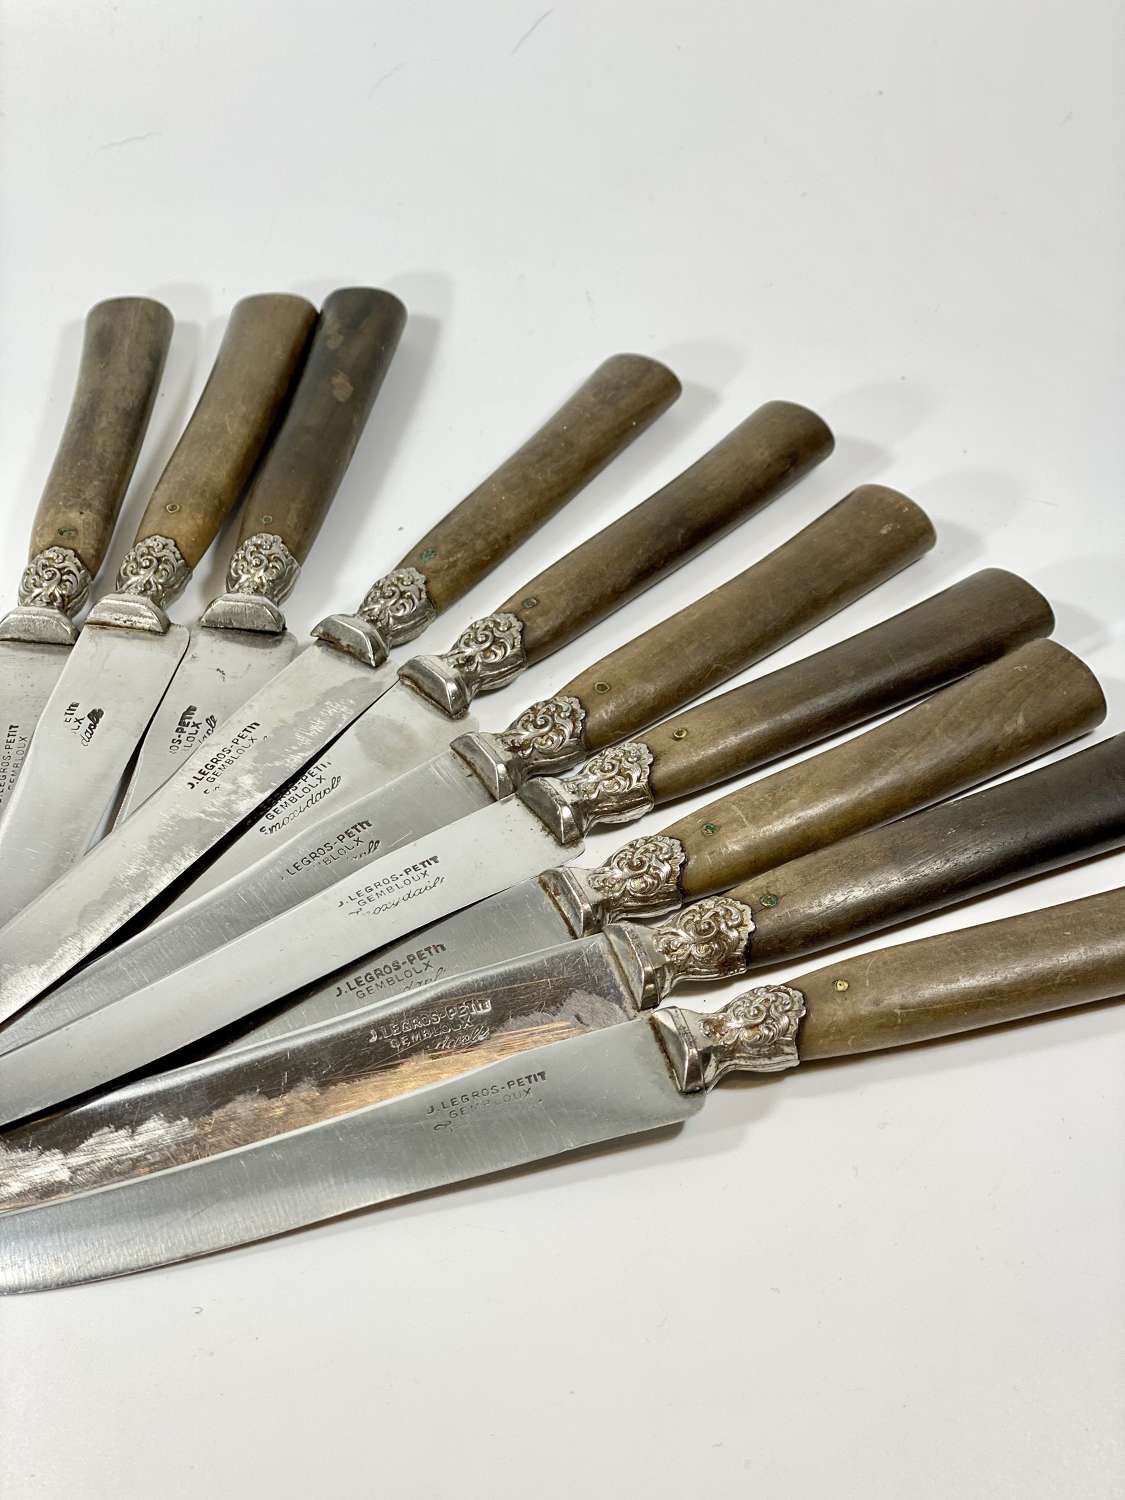 Set of 10 antique French wooden handled knives